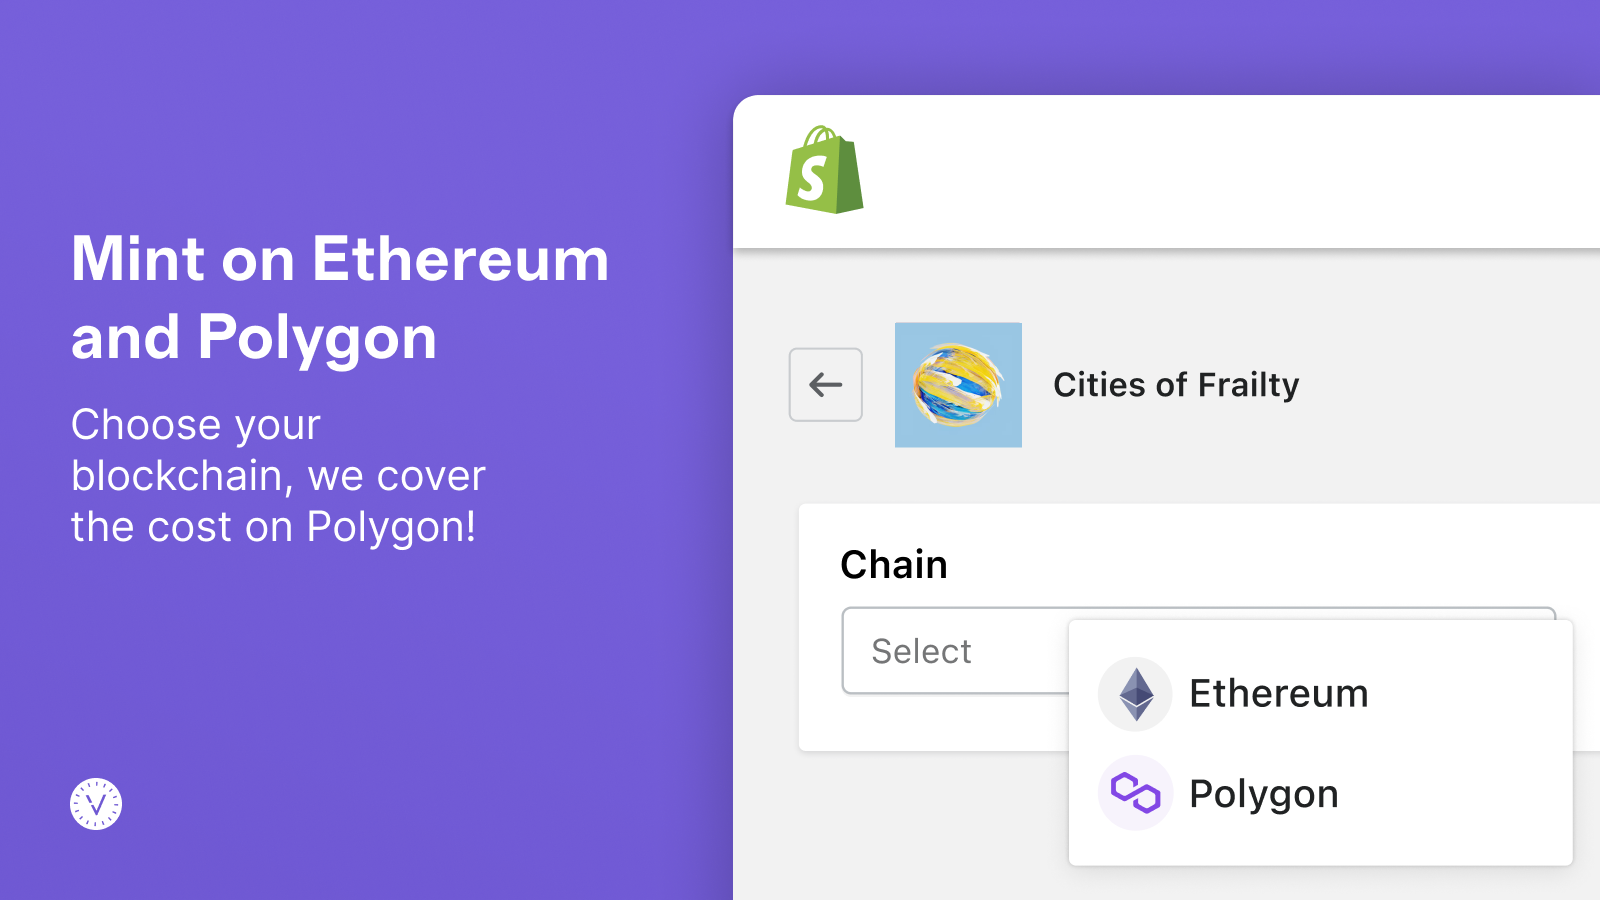 Mint on Ethereum and Polygon